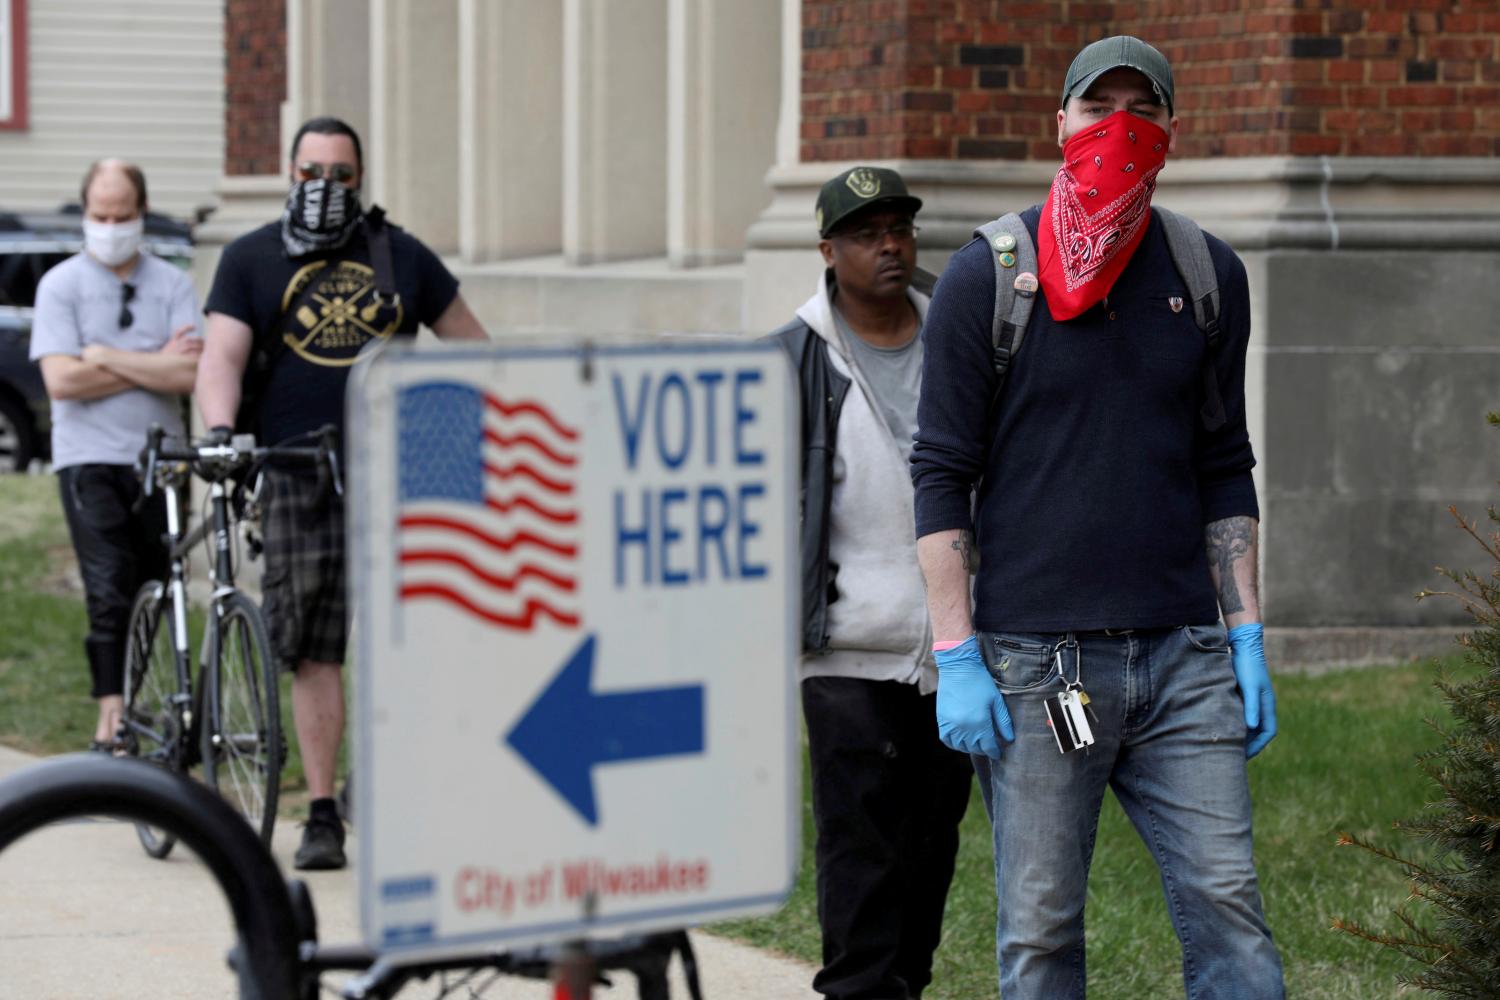 FILE PHOTO: Patrick Kapple, right, waits in line outside Riverside University High School to cast a ballot during the presidential primary election held amid the coronavirus disease (COVID-19) outbreak in Milwaukee, Wisconsin, U.S. April 7, 2020. REUTERS/Daniel Acker